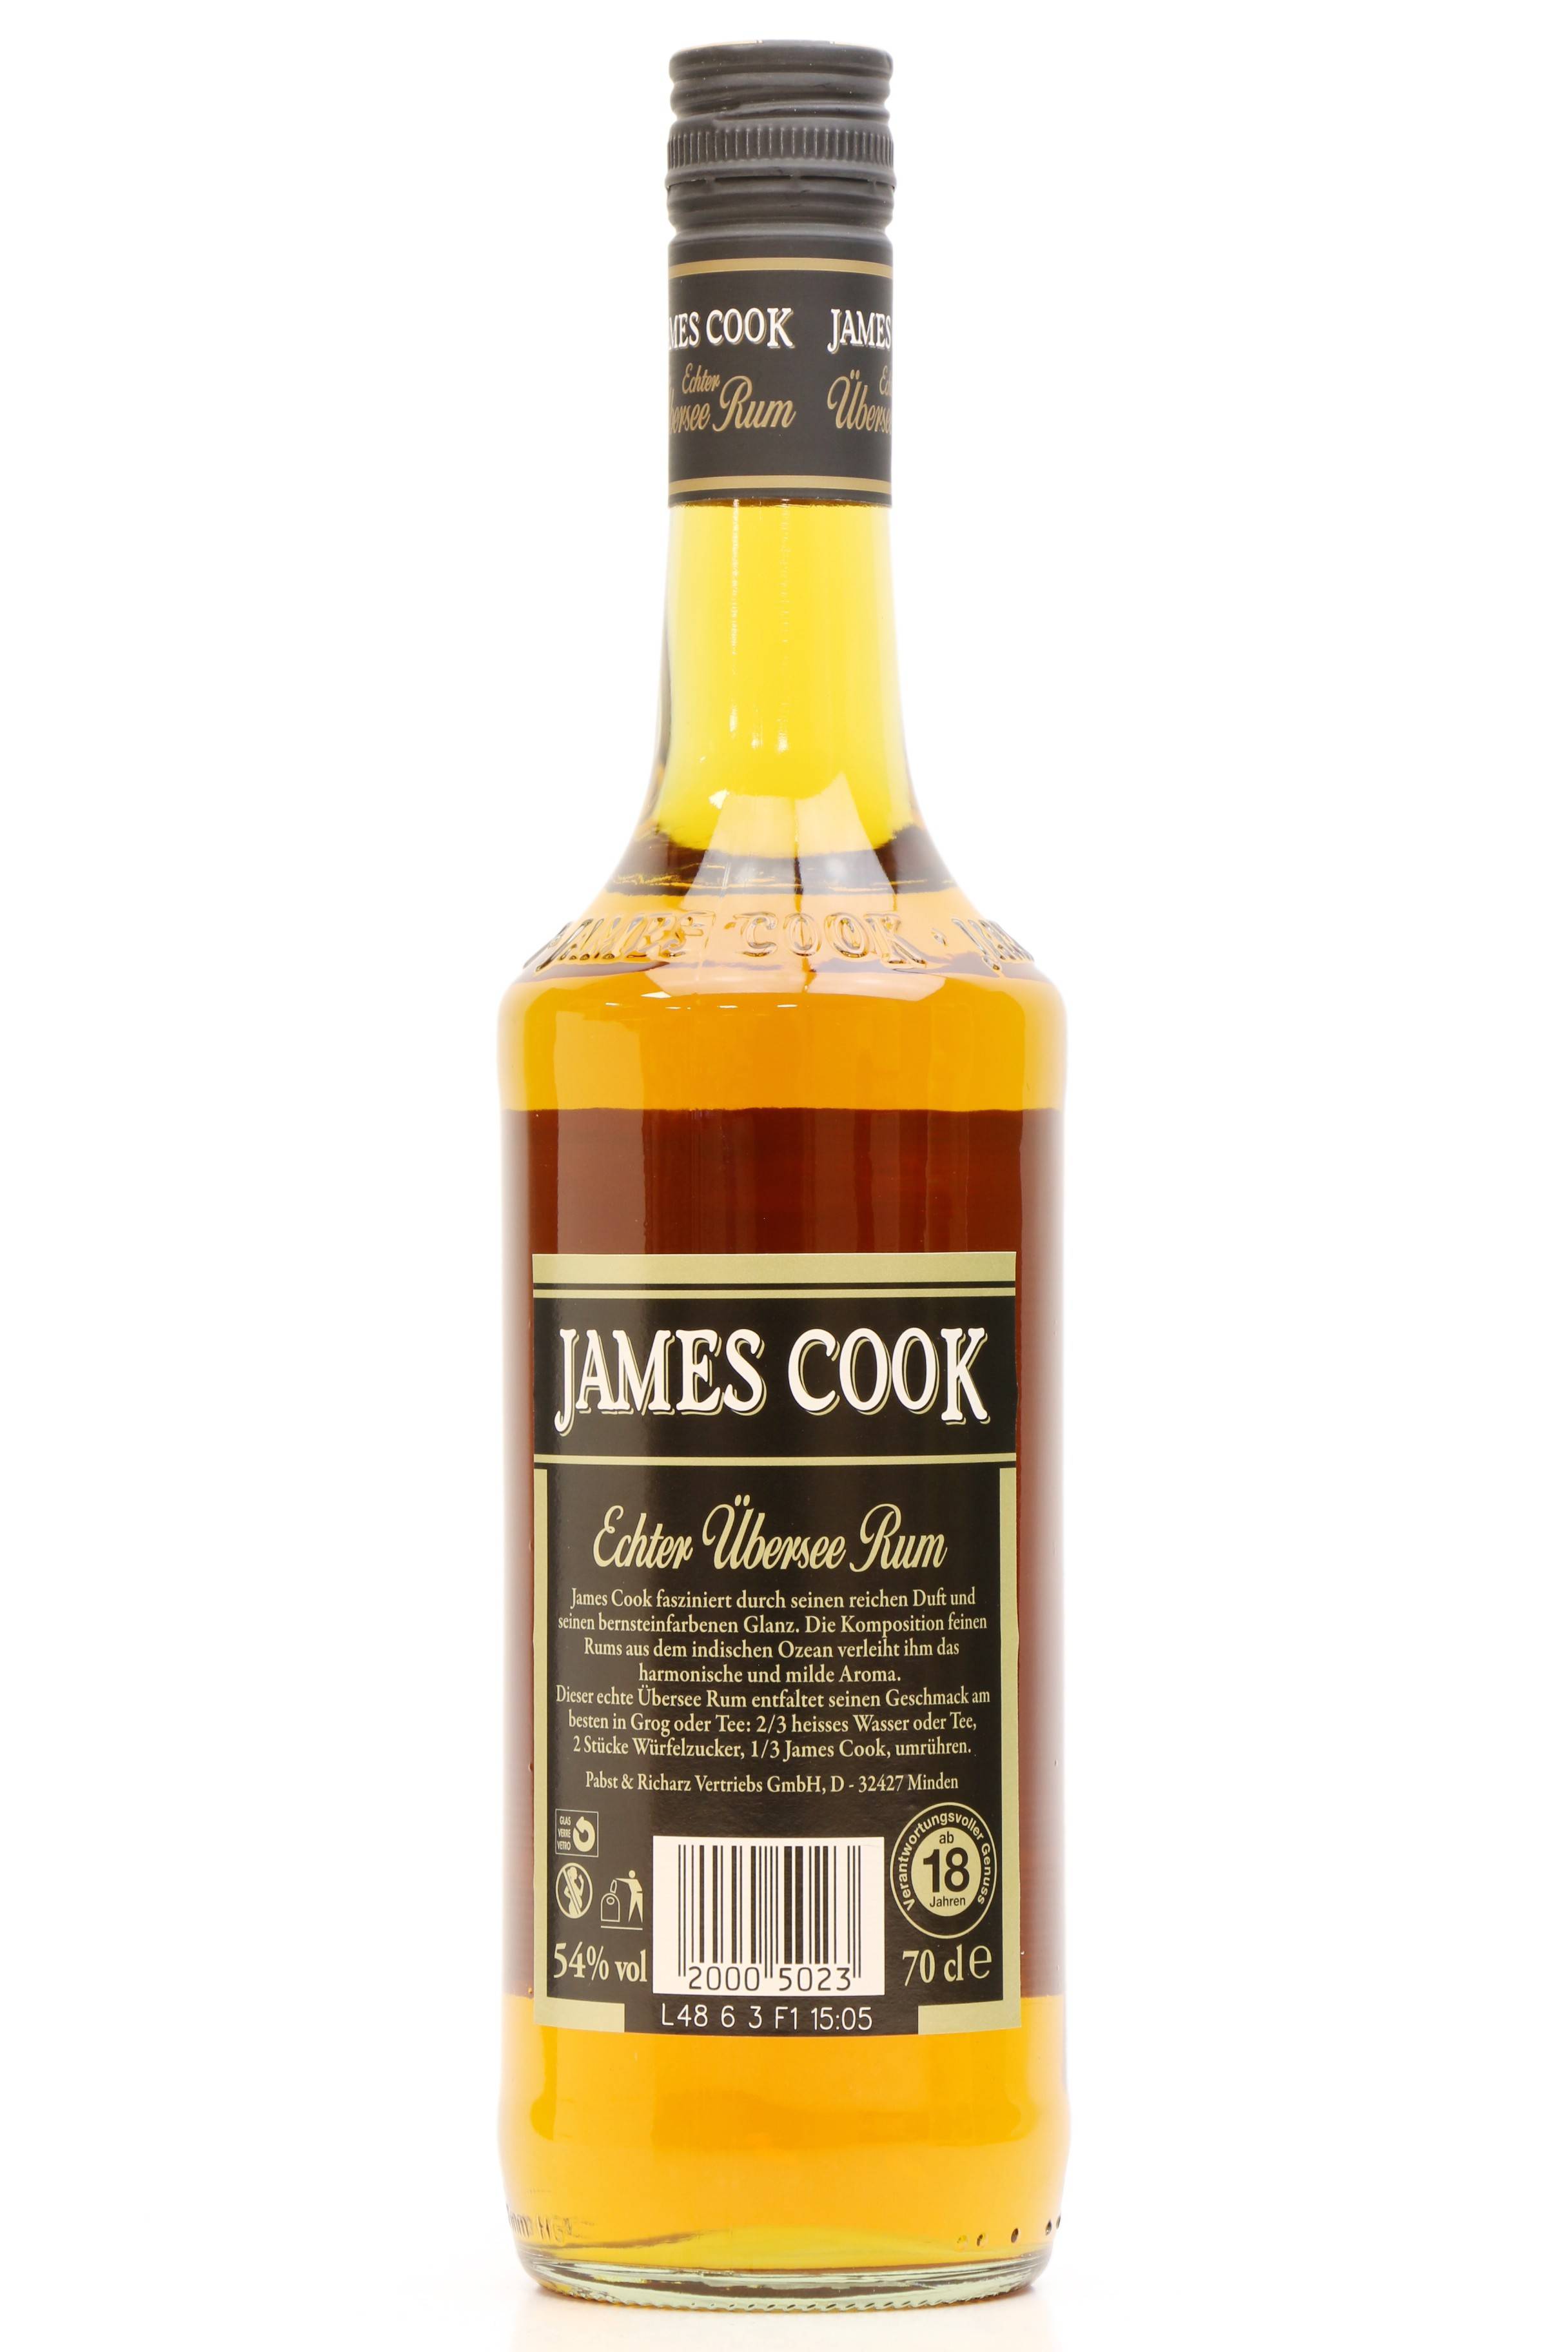 James Cook Echter Ubersee Rum - Whisky Just Auctions (54%)